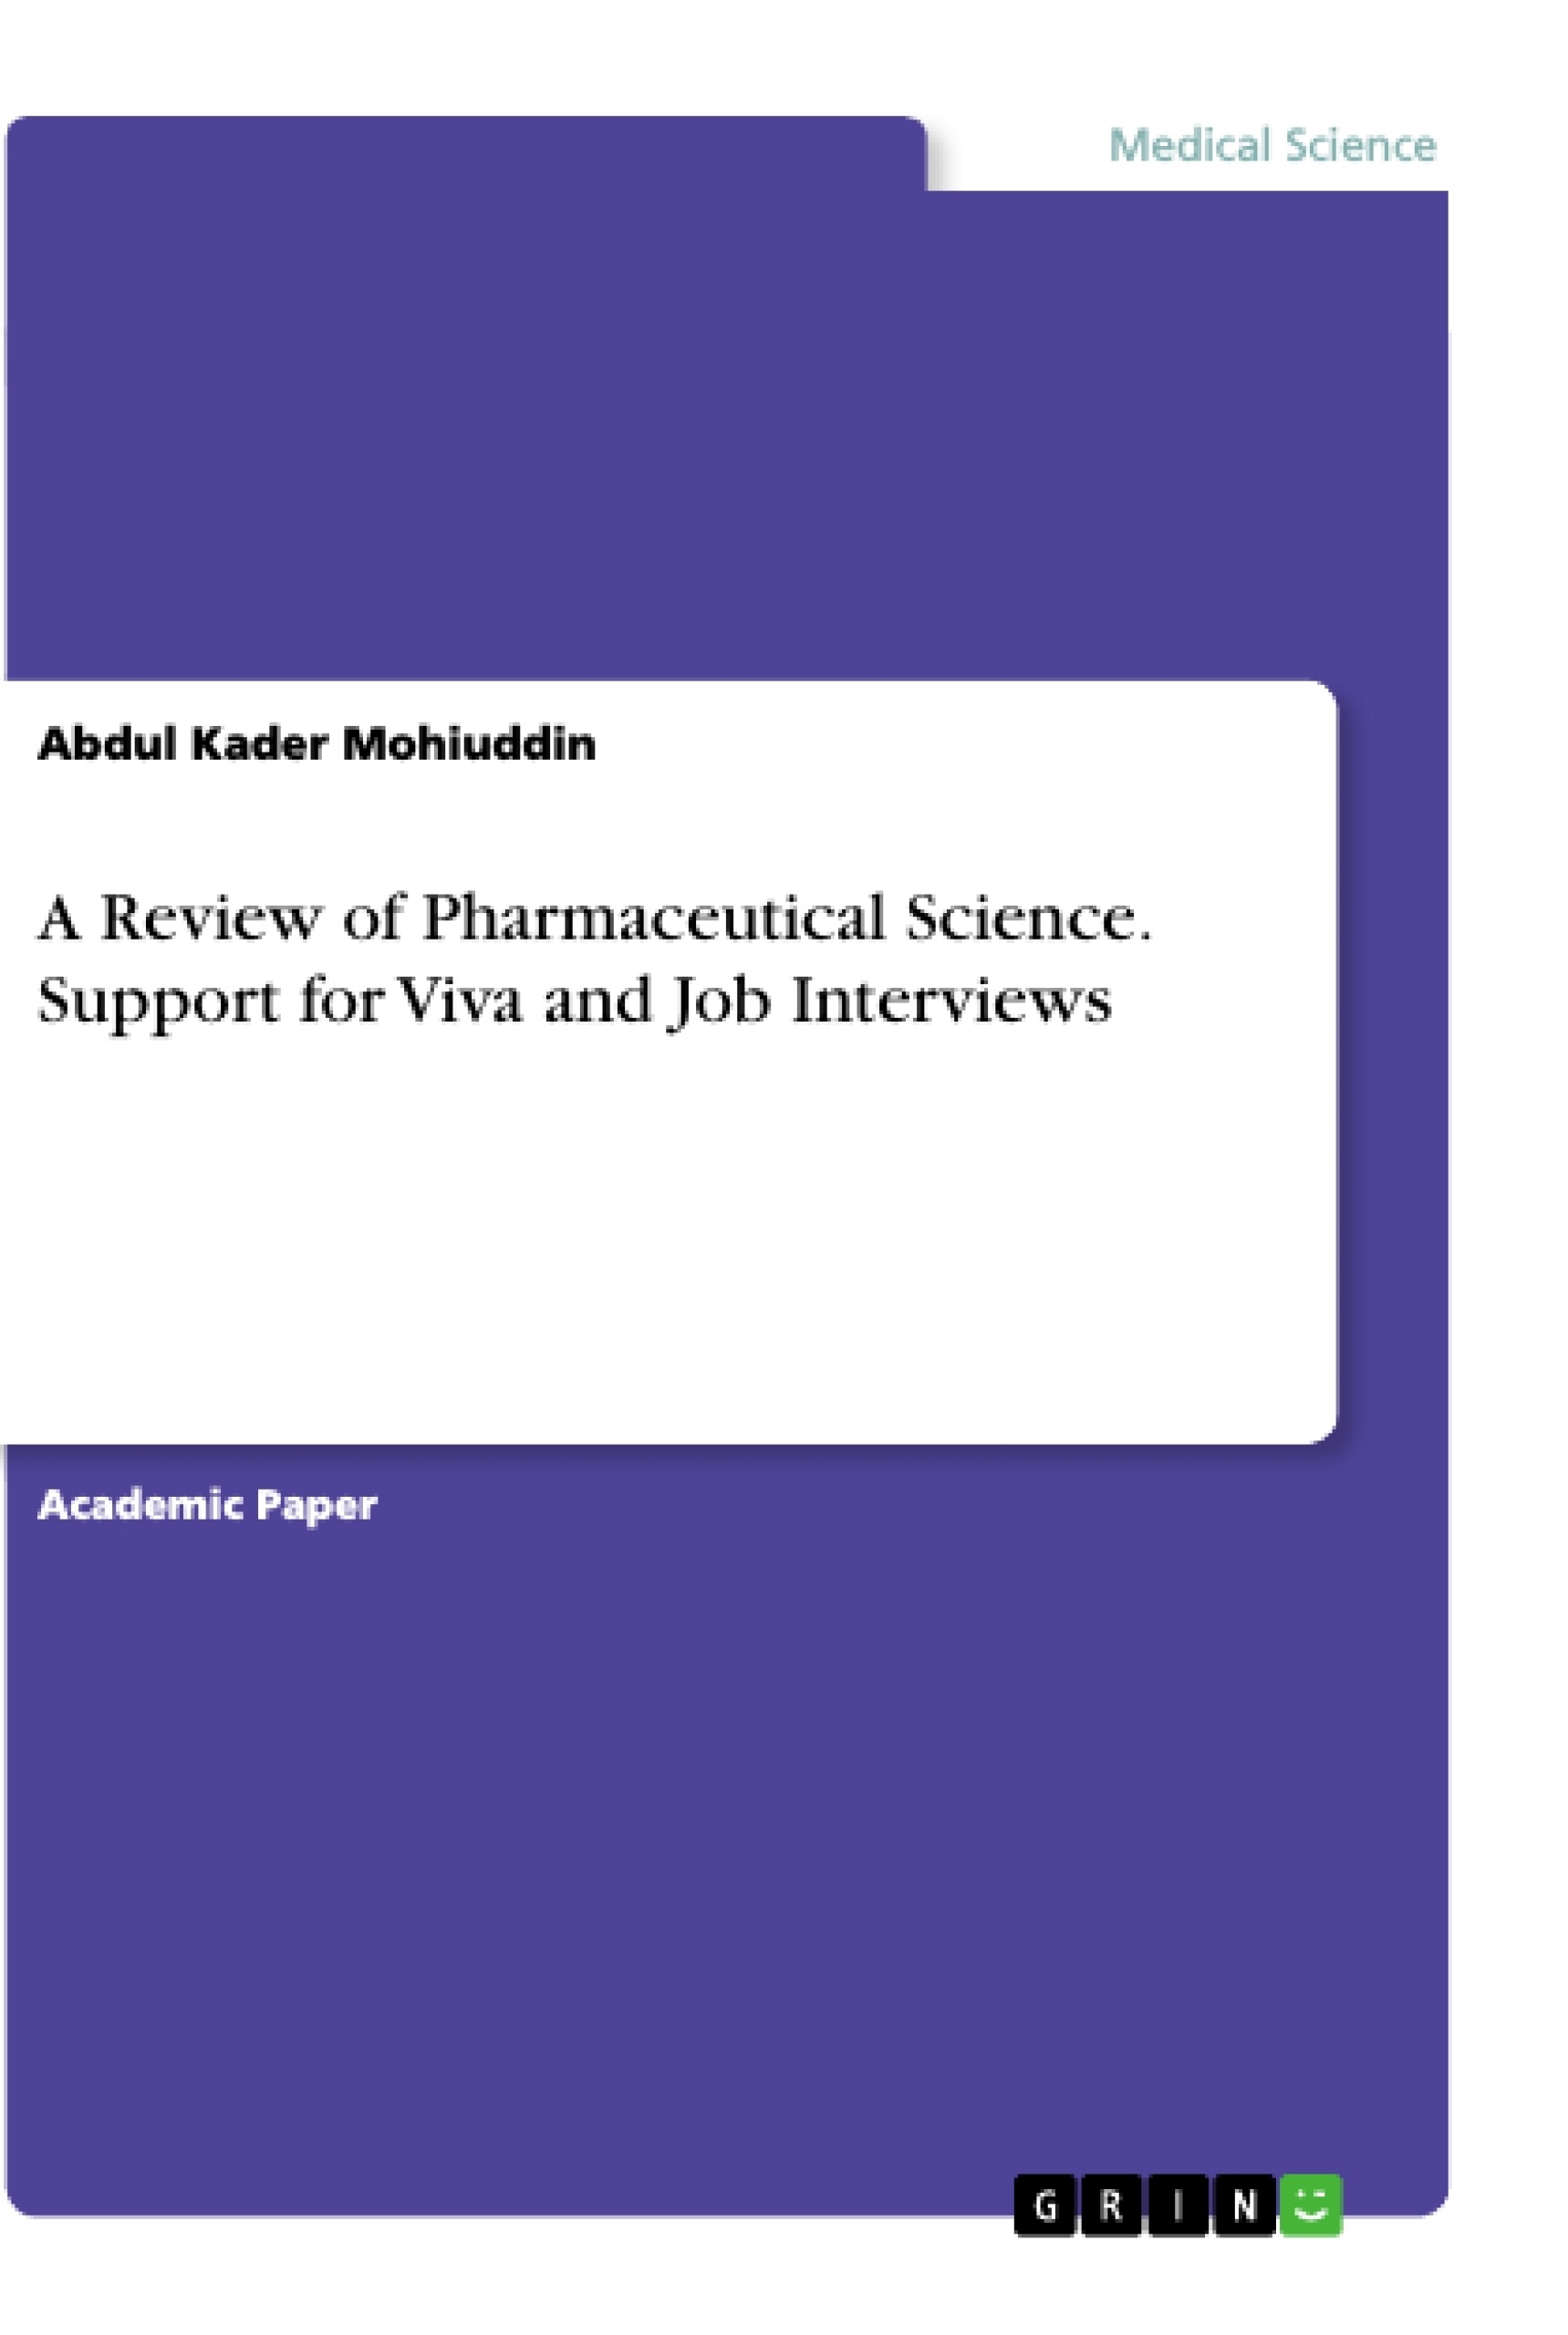 Title: A Review of Pharmaceutical Science. Support for Viva and Job Interviews